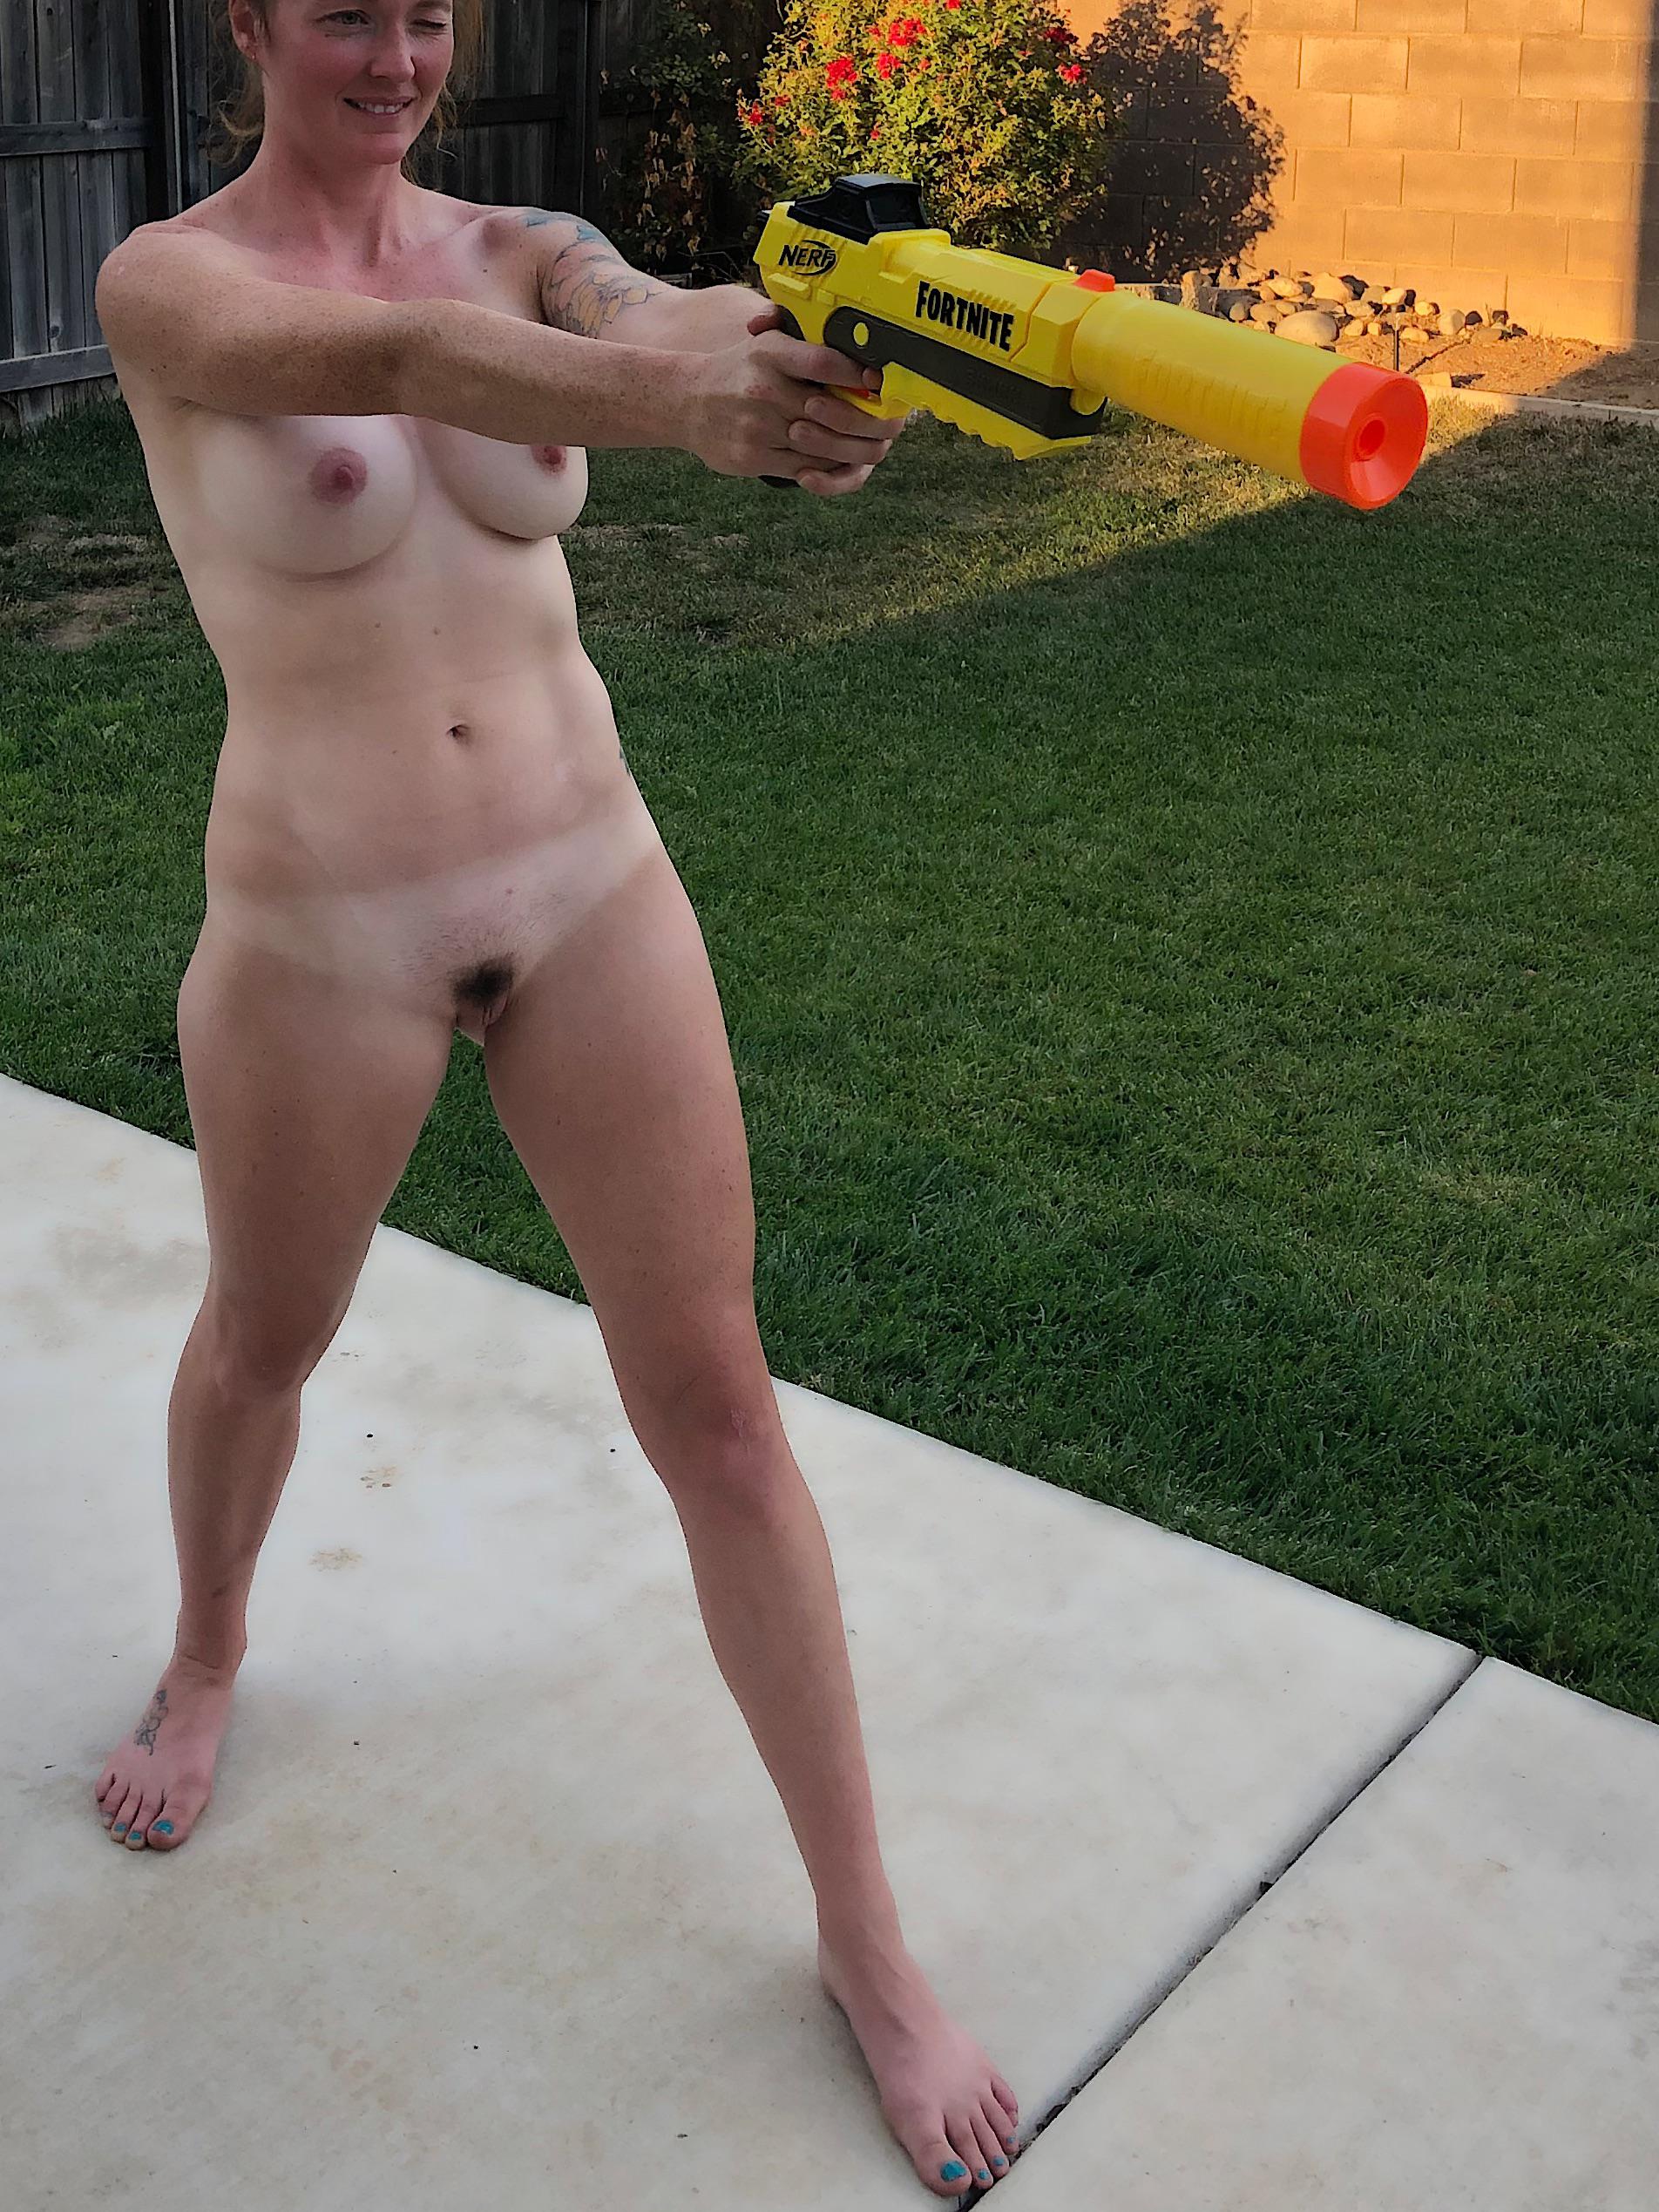 Naked Nerf dart fights in the backyard